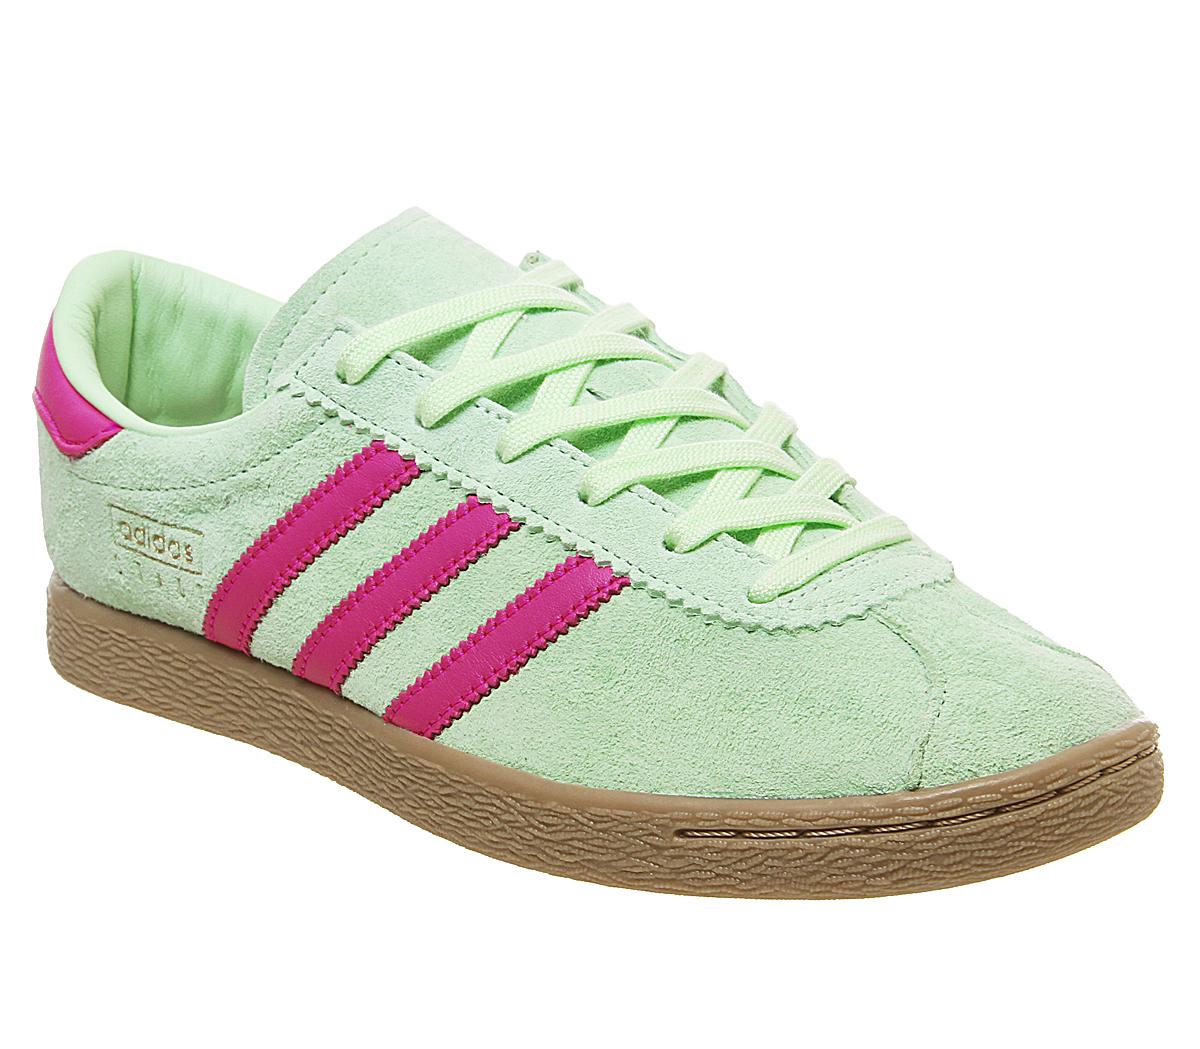 mens adidas stadt trainers